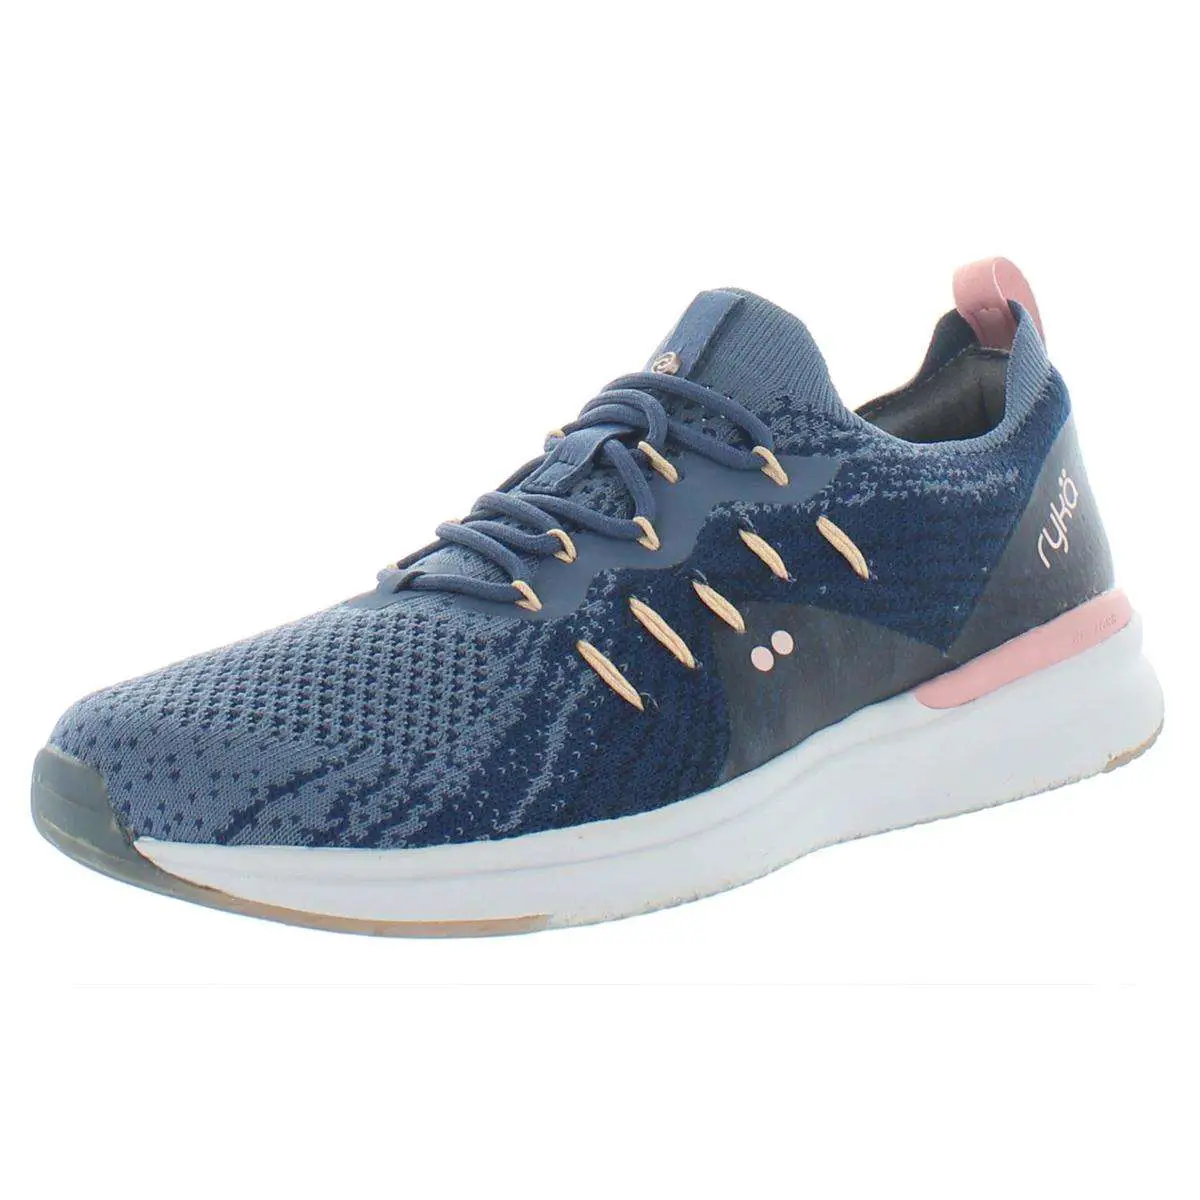 Ryka Womens Momentum Blue Knit Running Shoes Sneakers 8 ...